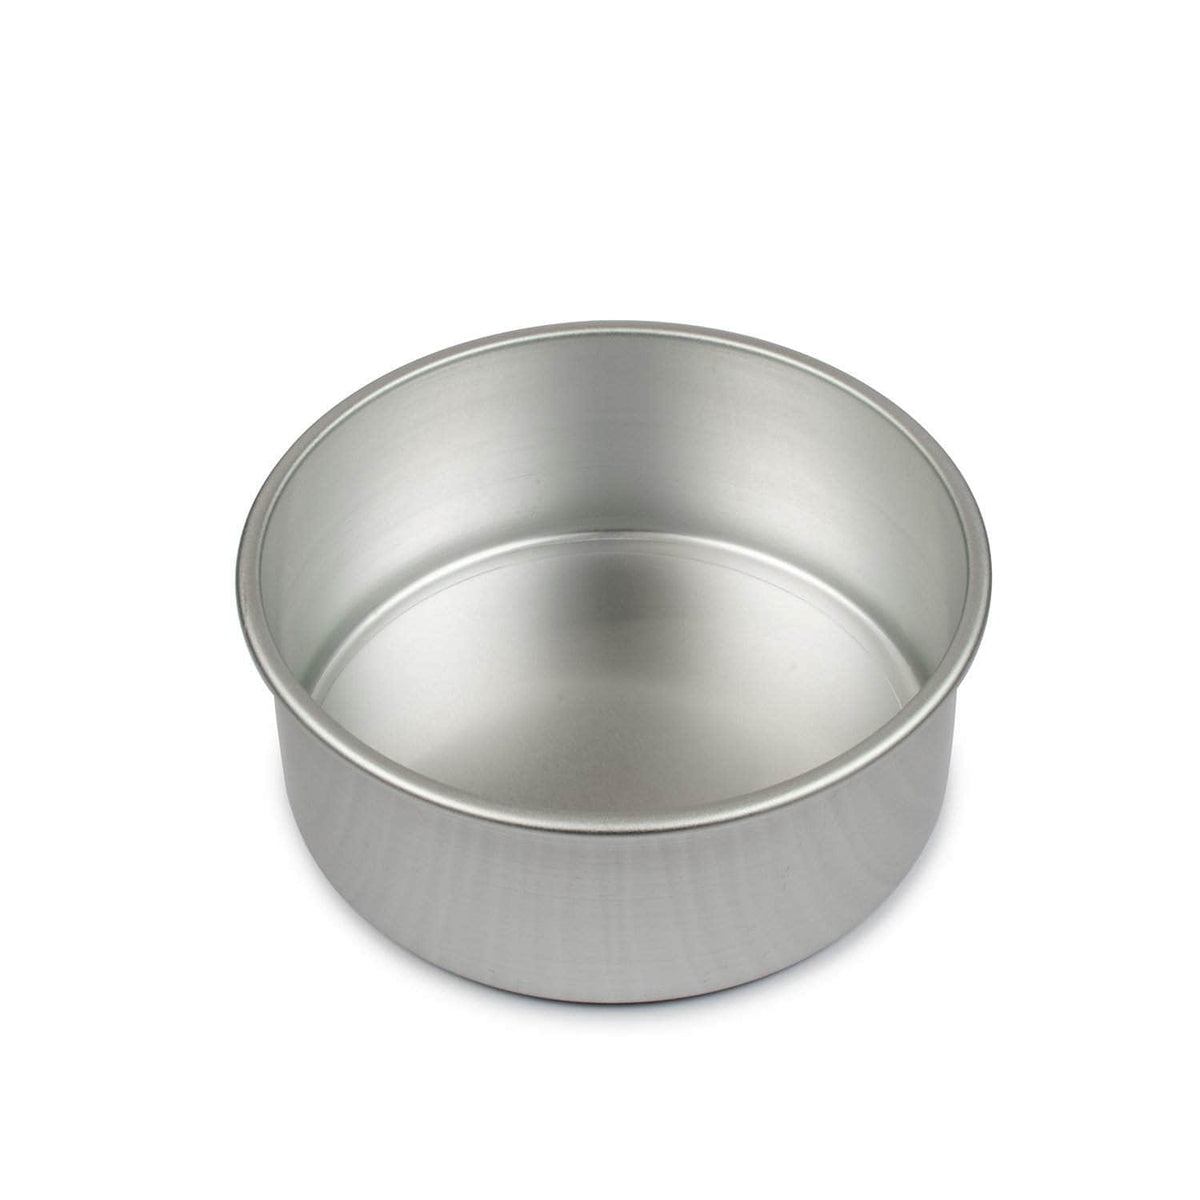 *New* Silver anodised deep cake tin 7 inches